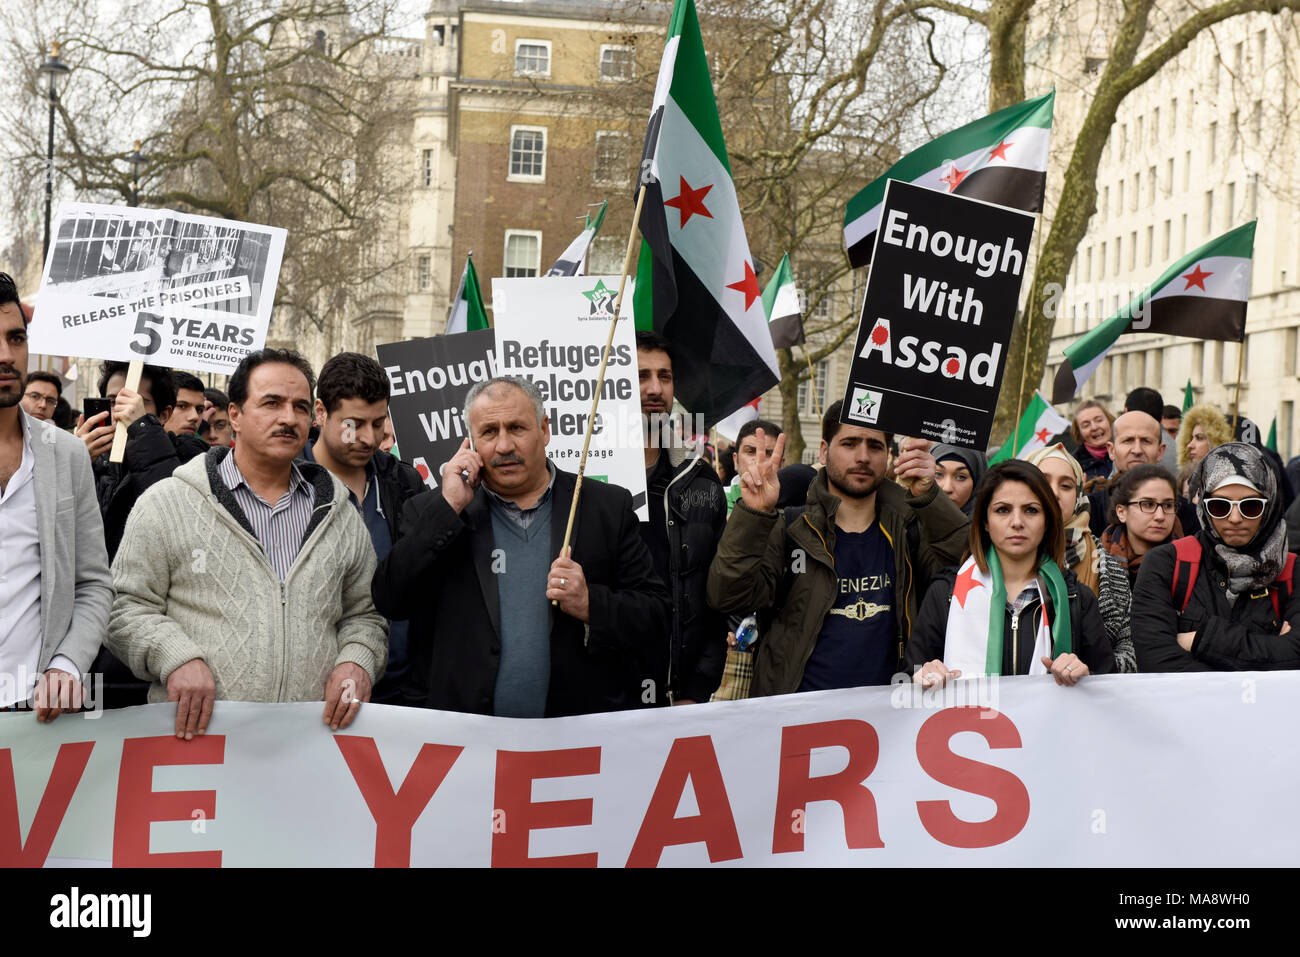 Syrian protesters are holding placards while demonstrating against the Assad regime outside the Downing Street in London, UK. Stock Photo